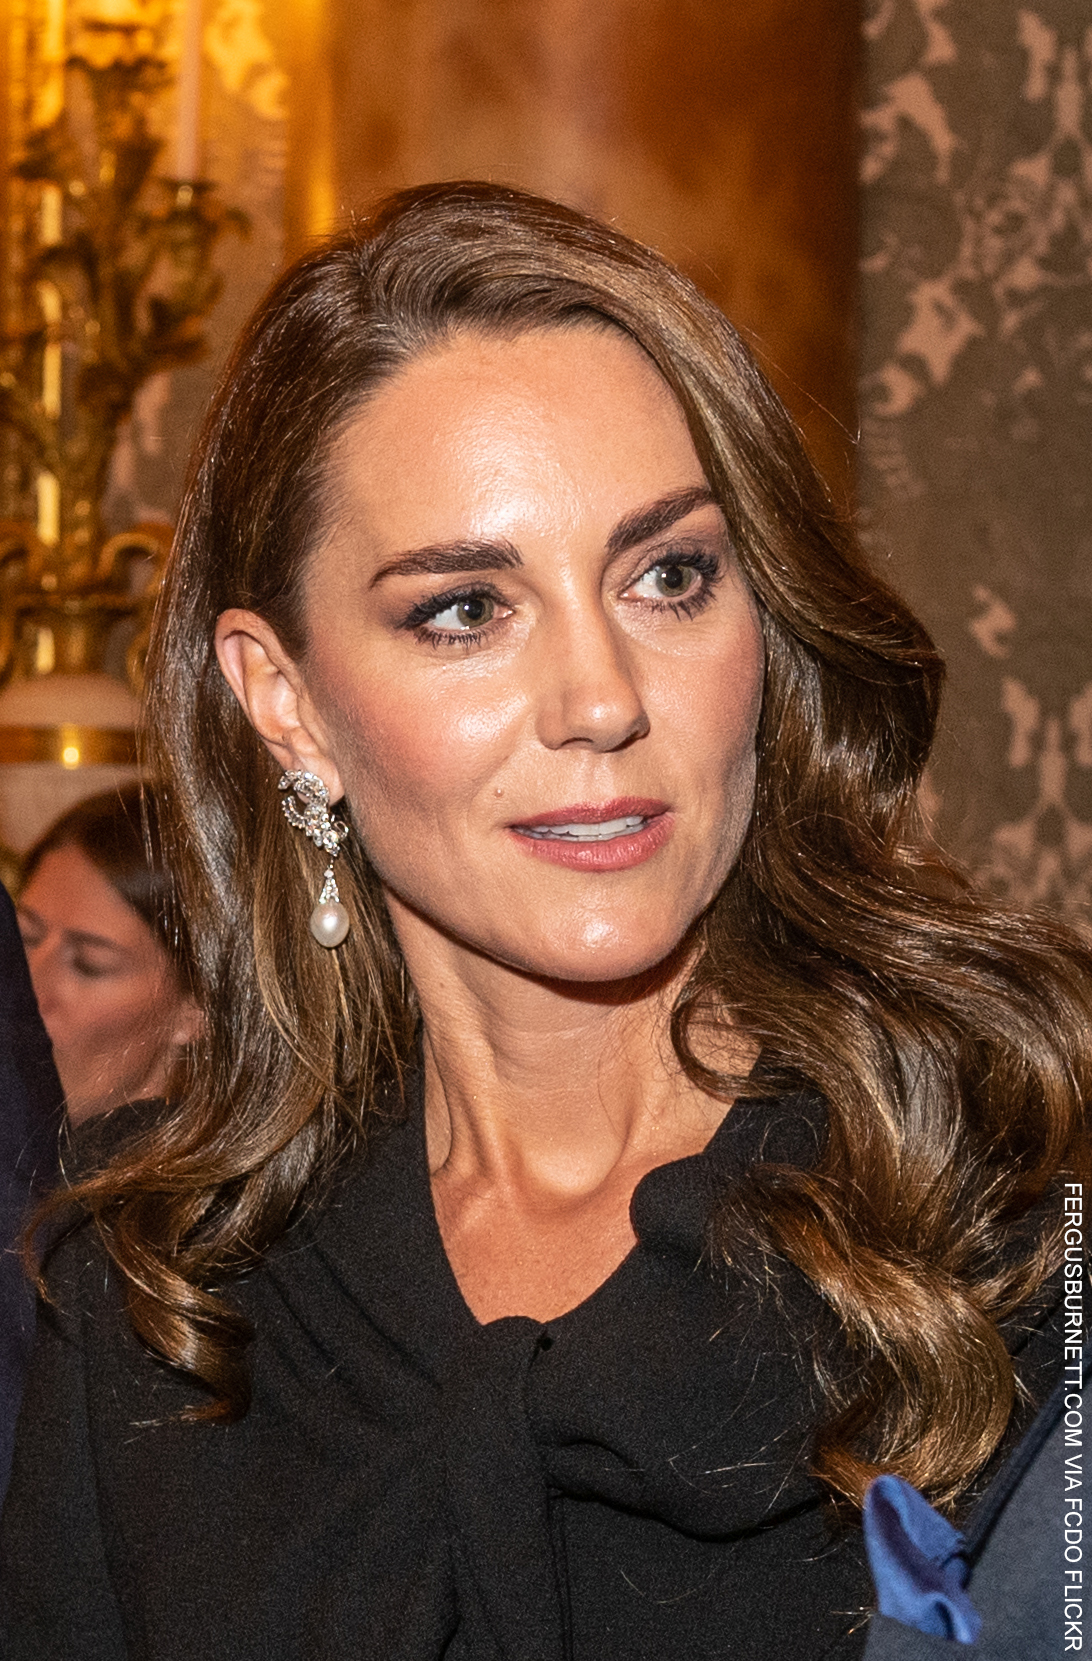 Kate Middleton Wears Diana’s Show-stopping Diamond and Pearl Earrings To Buckingham Palace Reception On The Eve Of Queen’s Funeral